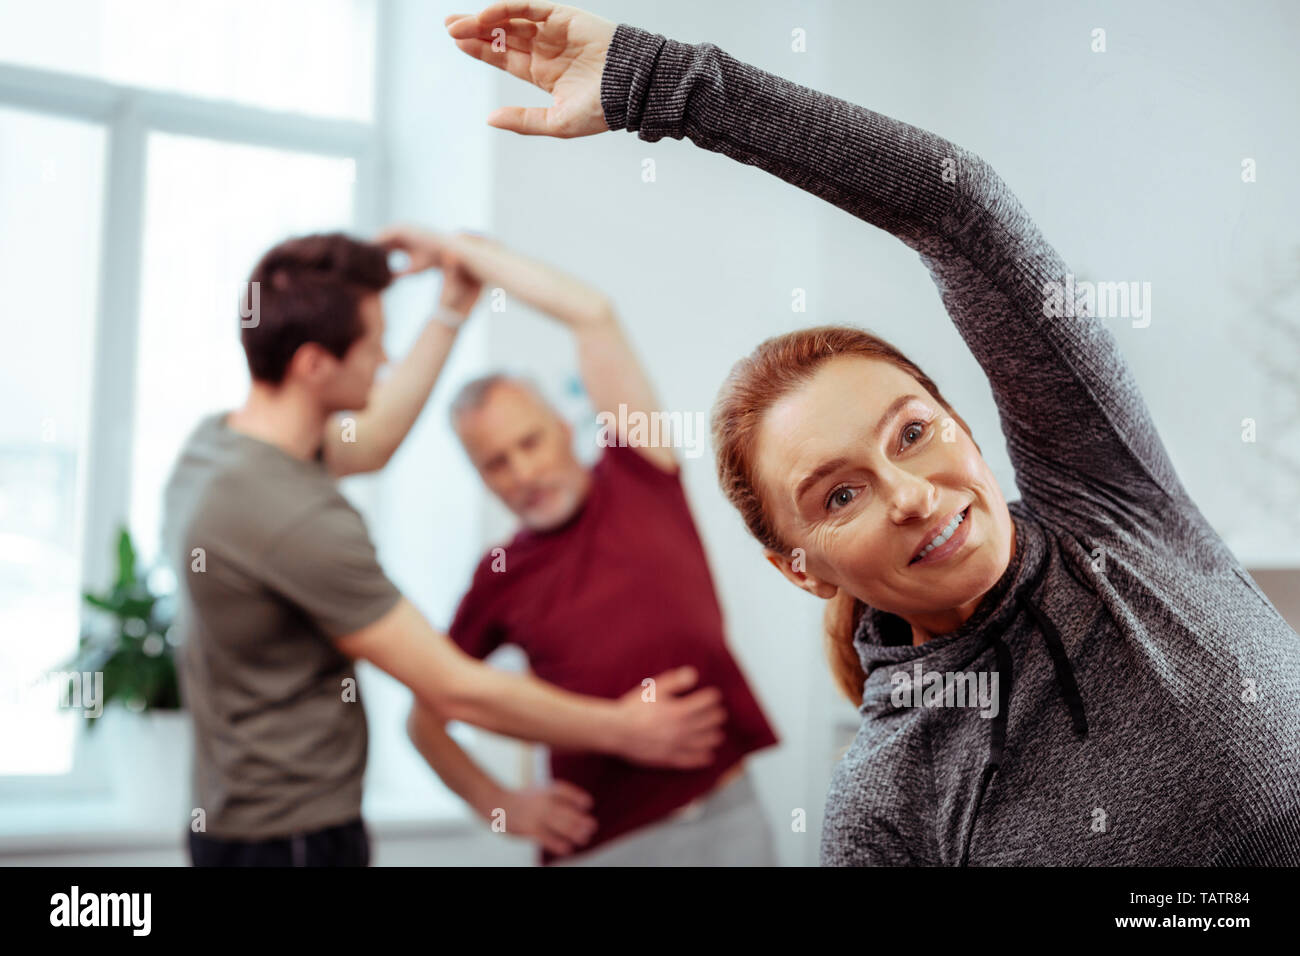 Physical activity. Joyful positive woman raising her hand up while doing physical exercises Stock Photo